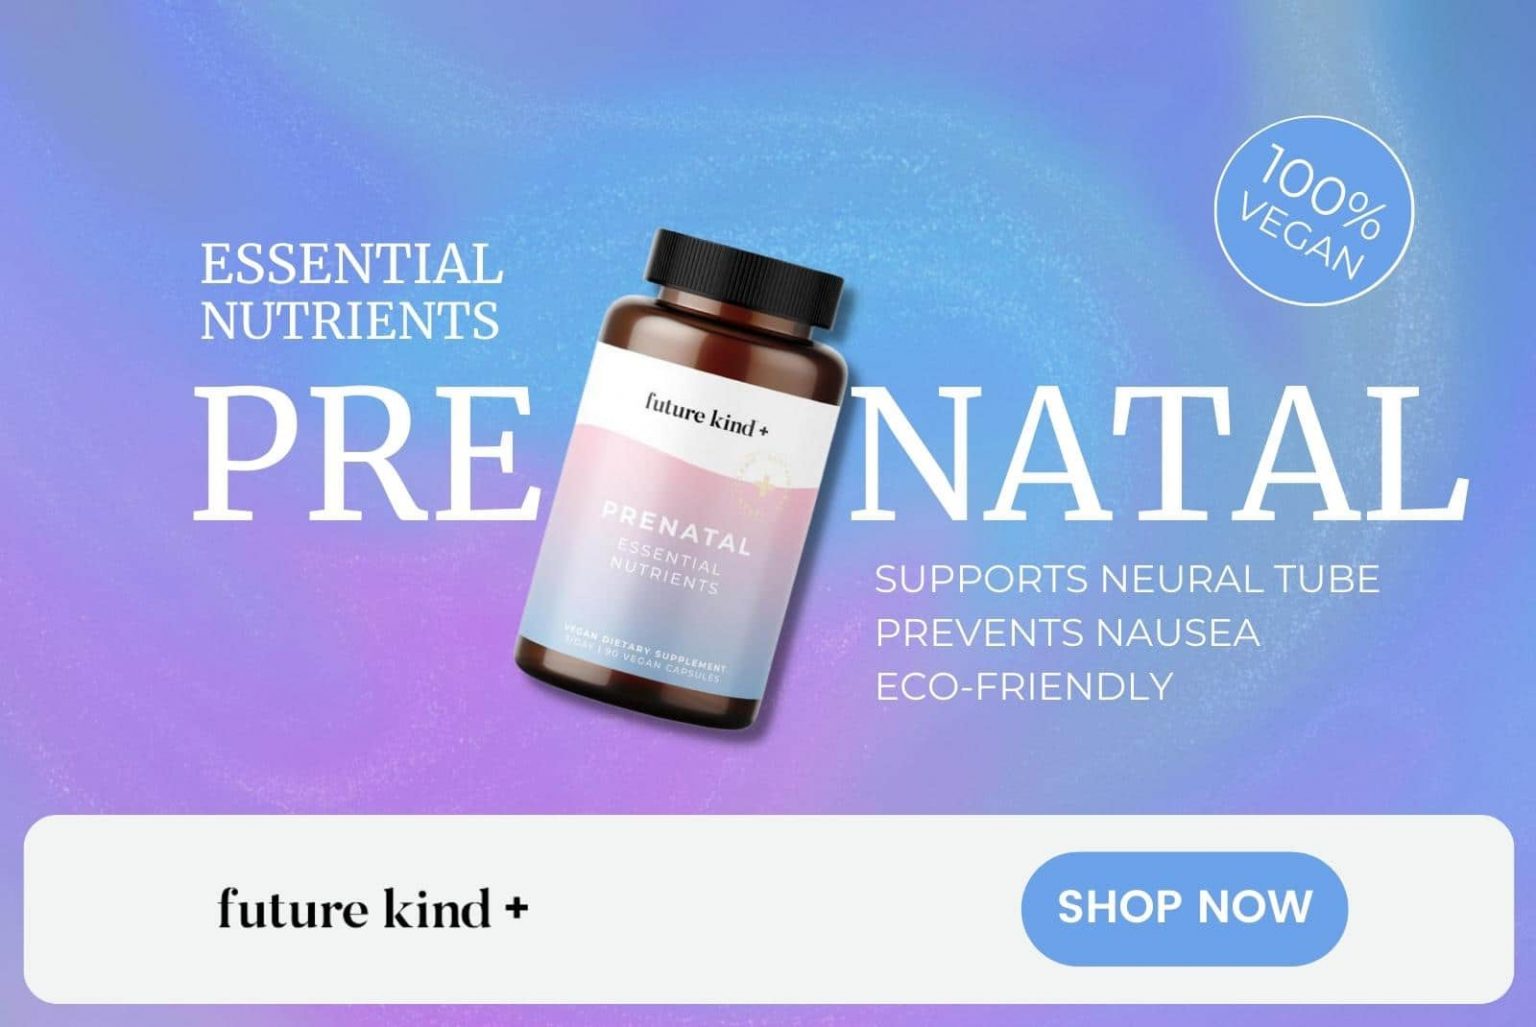 Future kind+ vegan Prenatal contains a combination of 22 nutrients made up of vitamins, minerals and herbal ingredients that are designed to support you and prevent nausea, incorporating organic ginger and peppermint powder.